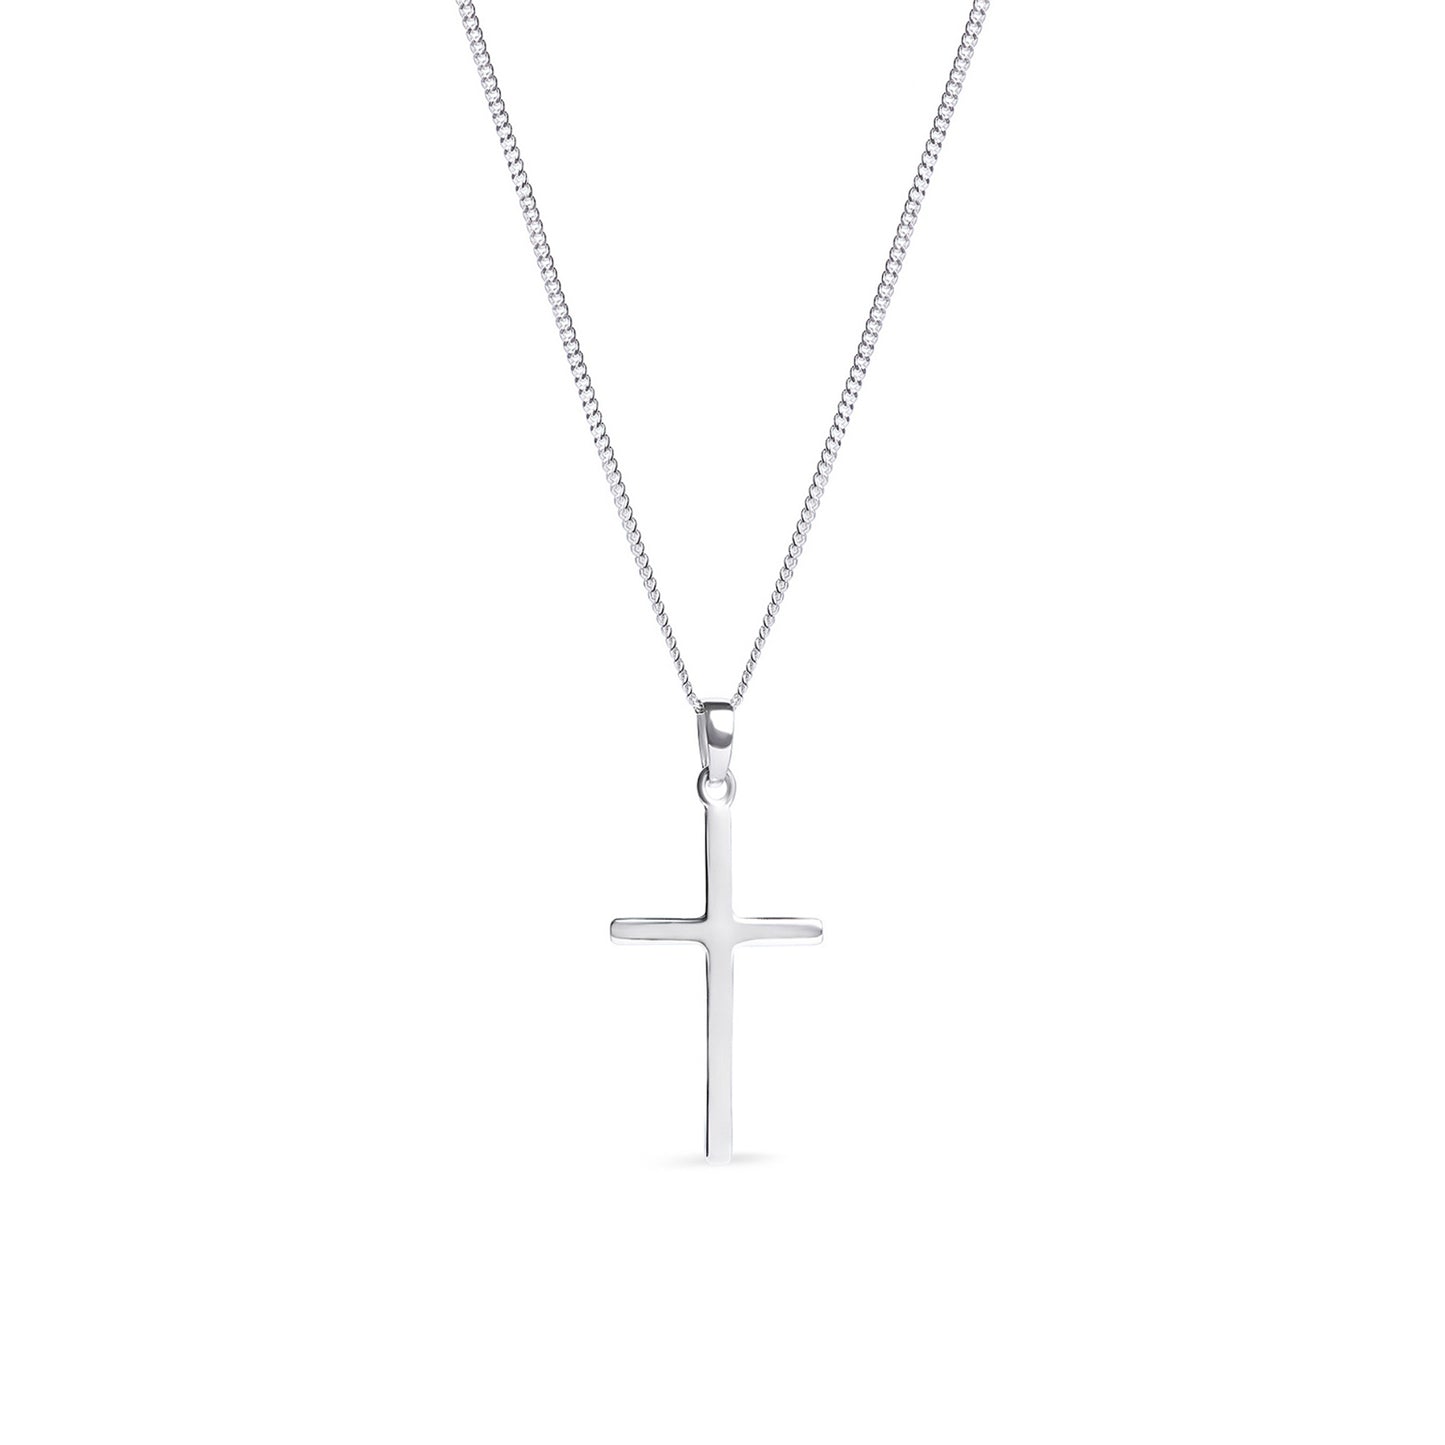 Sterling Silver Cross Pendant Necklace - 16" Chain - 27mm x 16mm